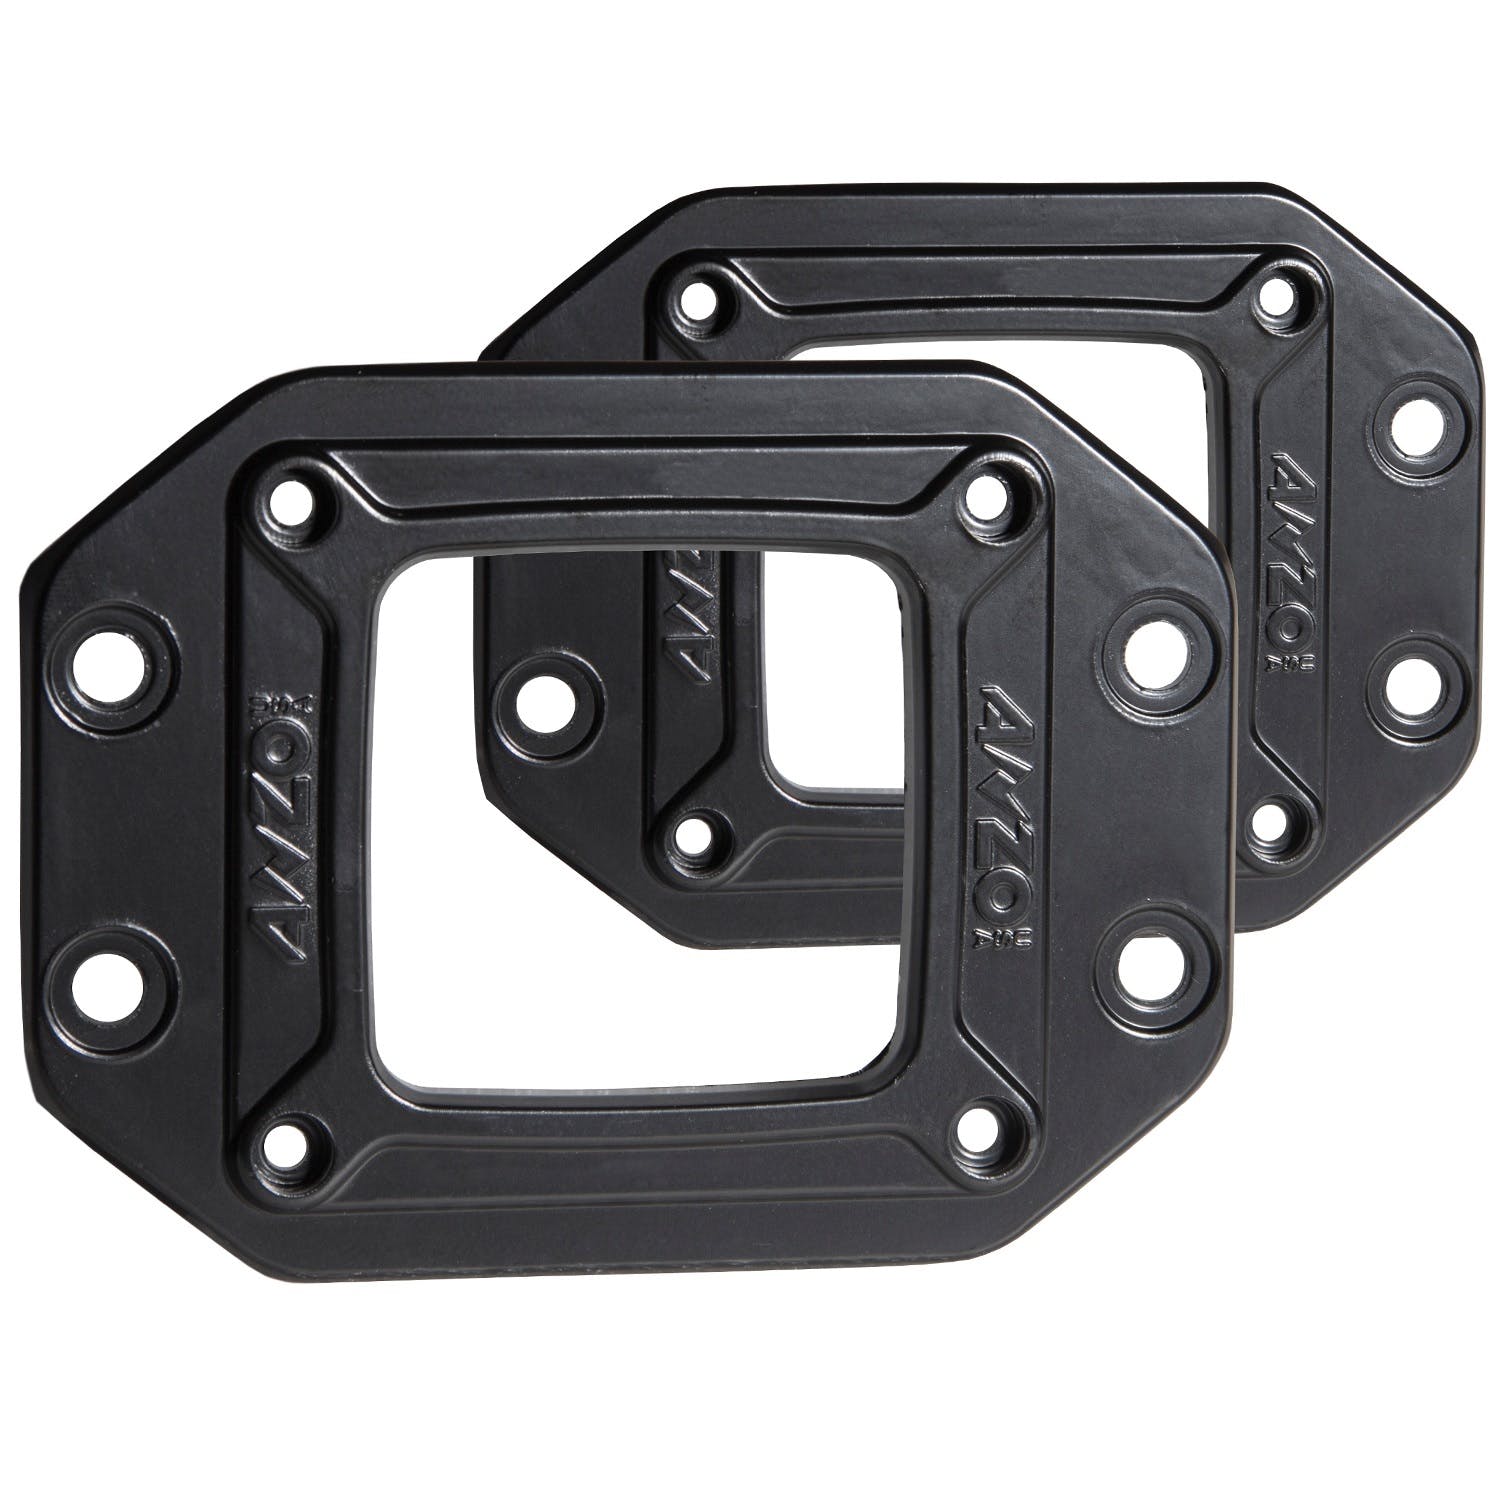 AnzoUSA 851066 3"x 3" Rugged Off Road LED Flush Mount Brackets